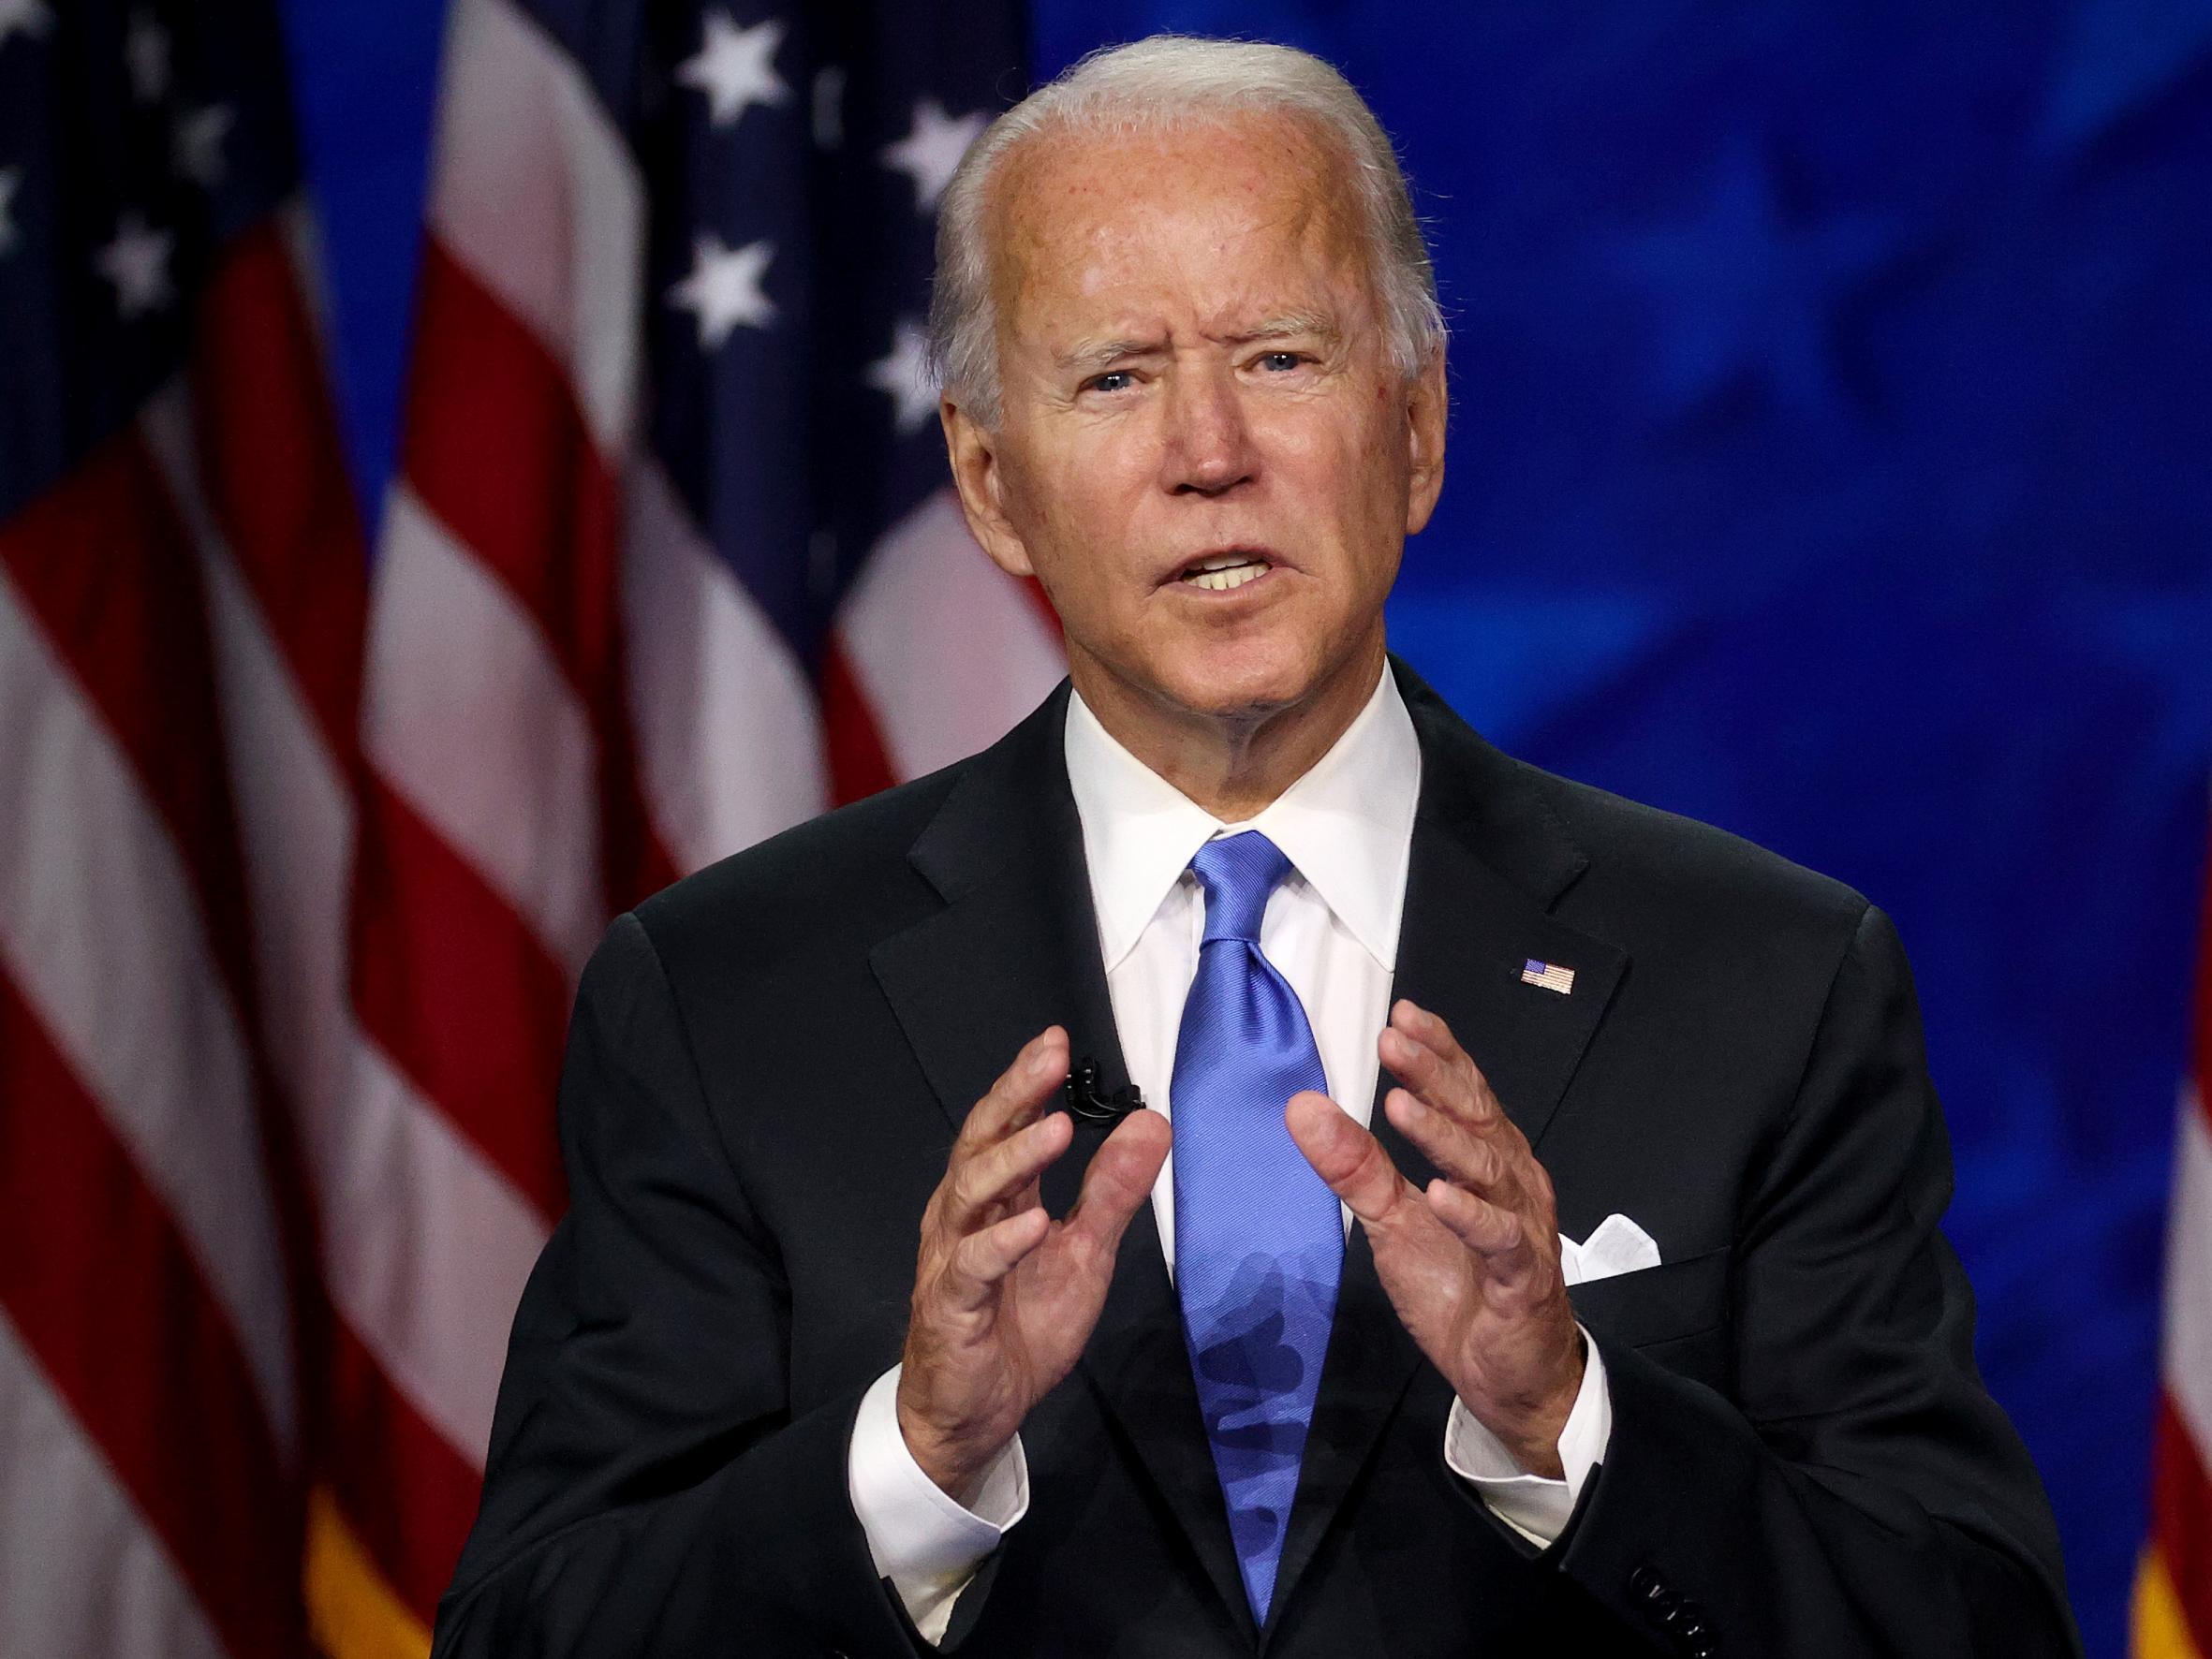 Trump 'fanning the flames of hate', says Biden as he challenges president to unify nation after Portland and Kenosha violence